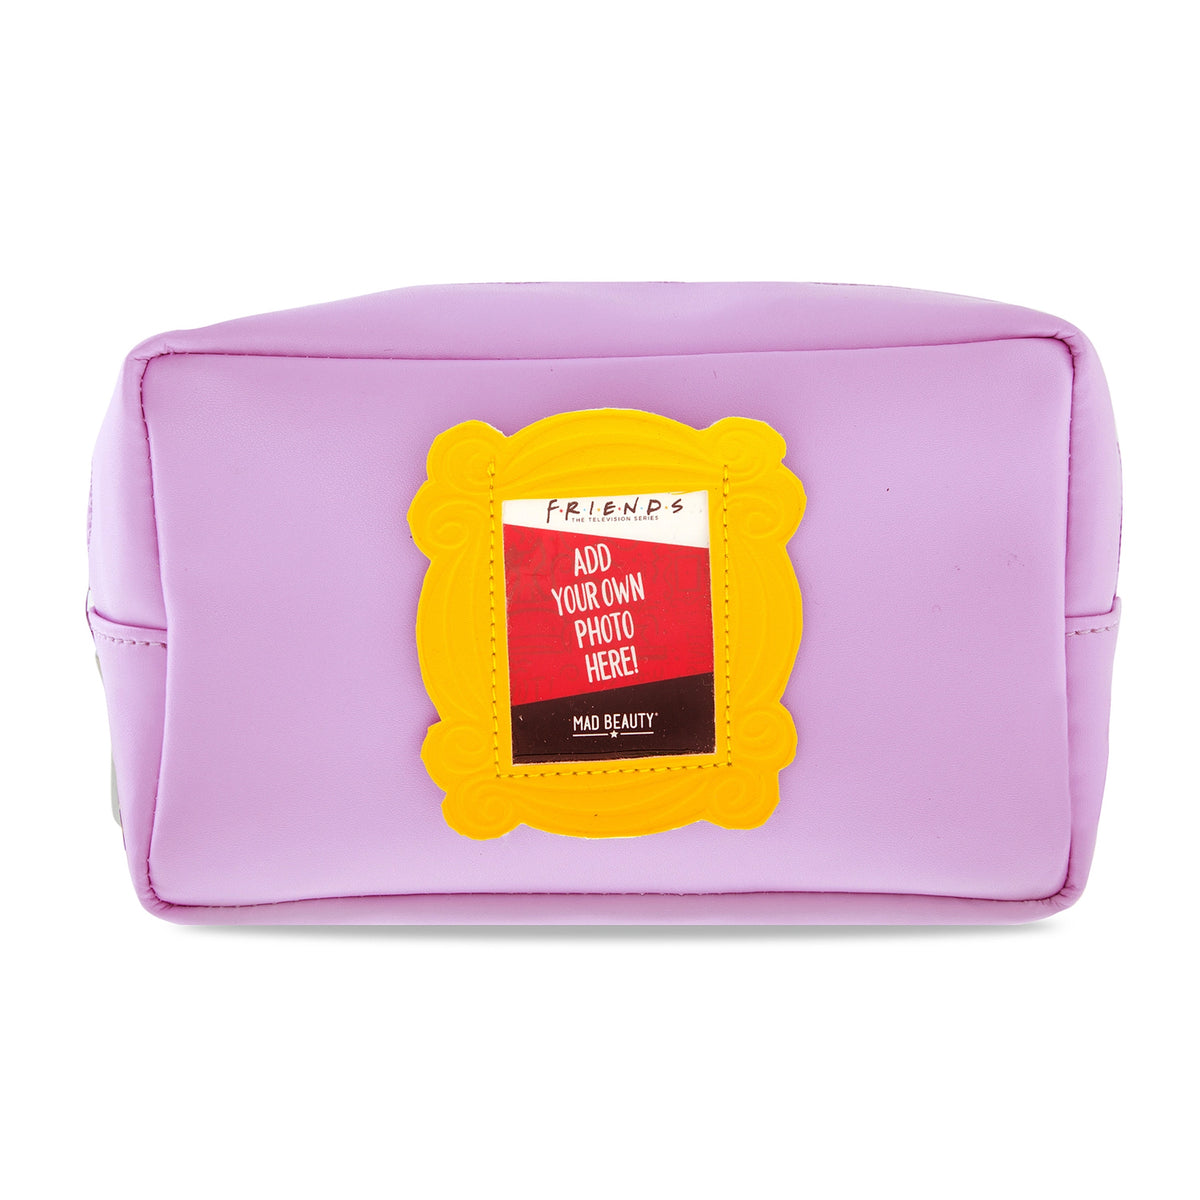 Friends Frame Cosmetic Bag